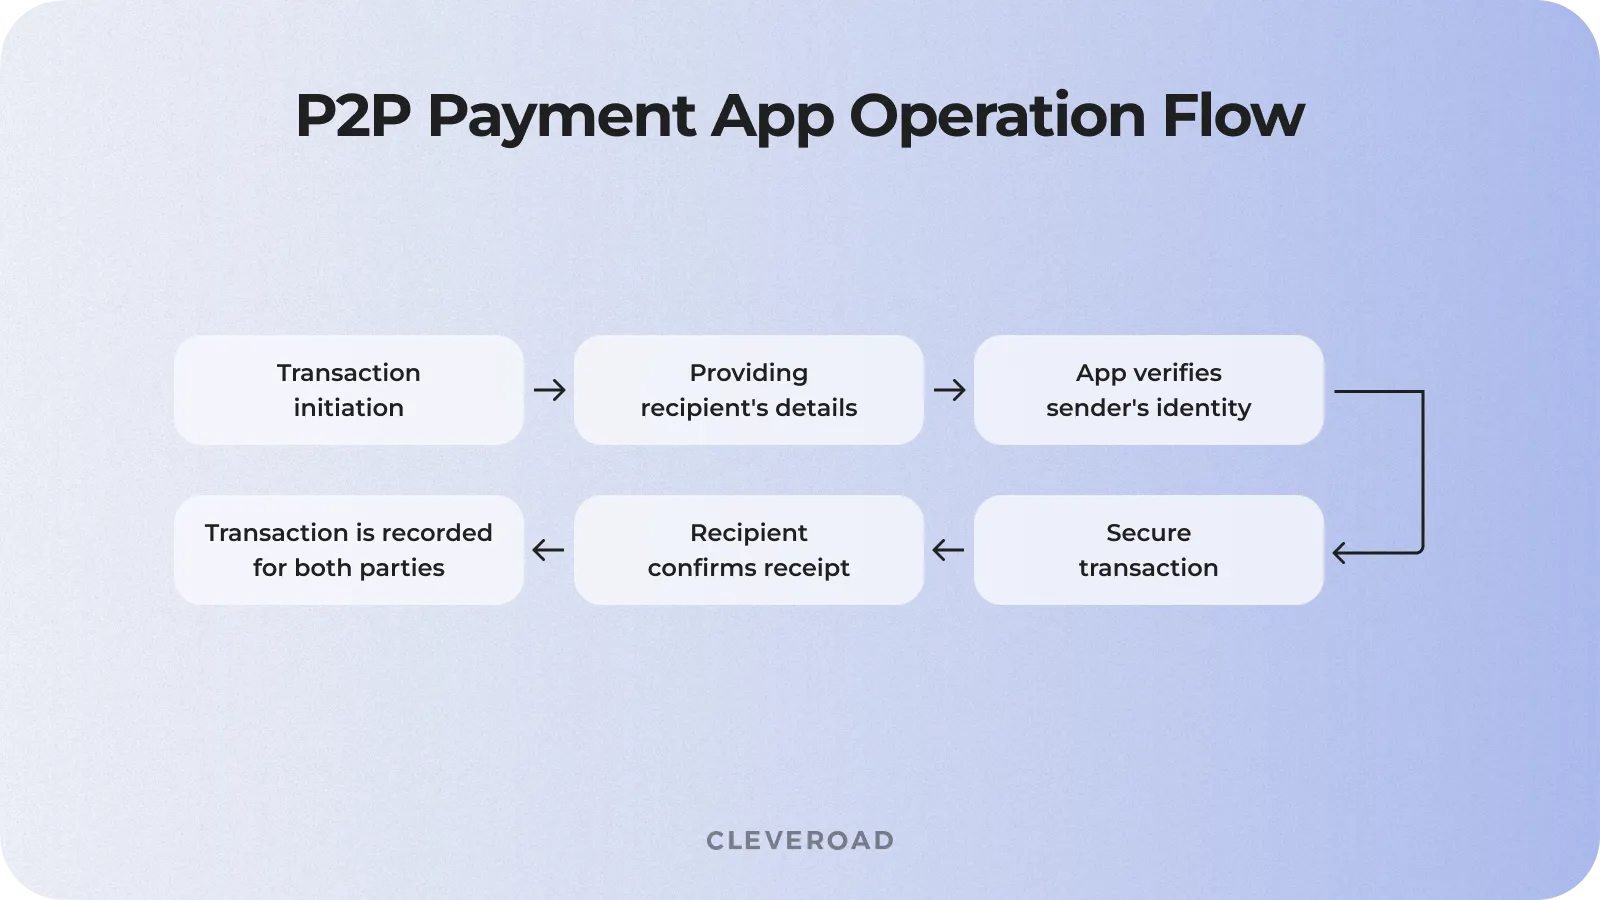 How P2P payment apps operate